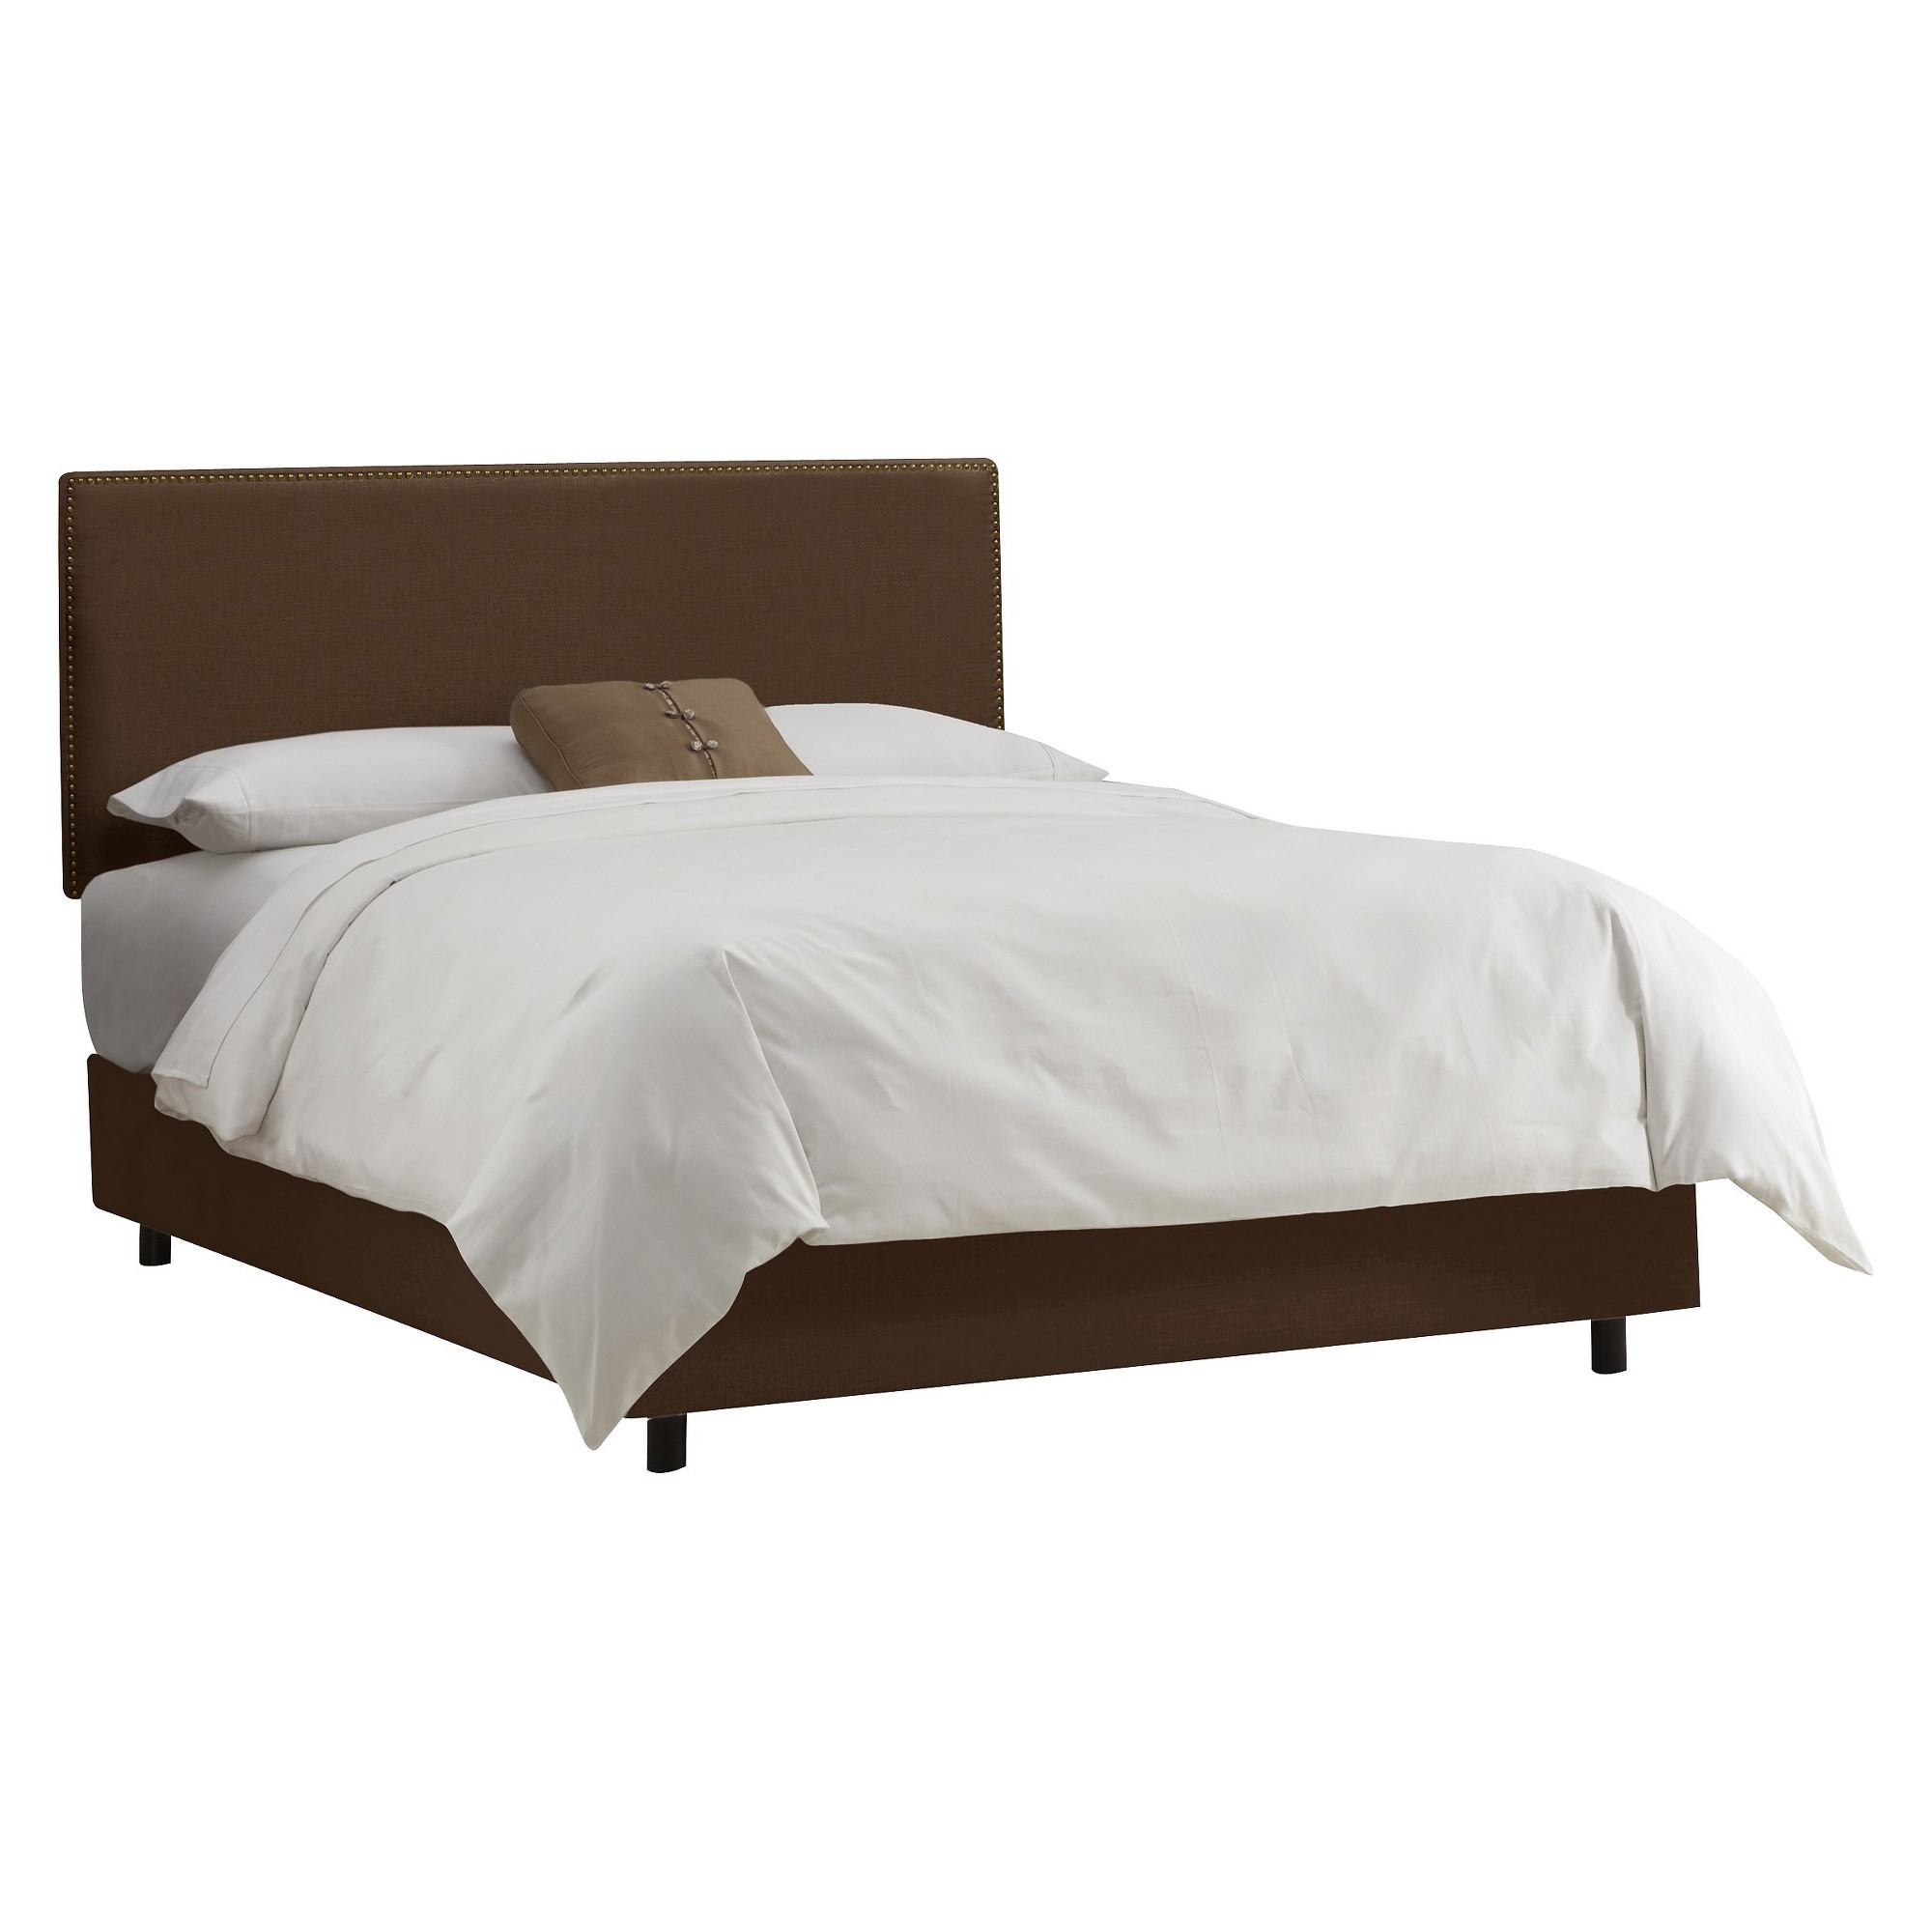 Twin Arcadia Nailbutton Linen Upholstered Bed Linen Chocolate - Skyline Furniture, Linen Brown